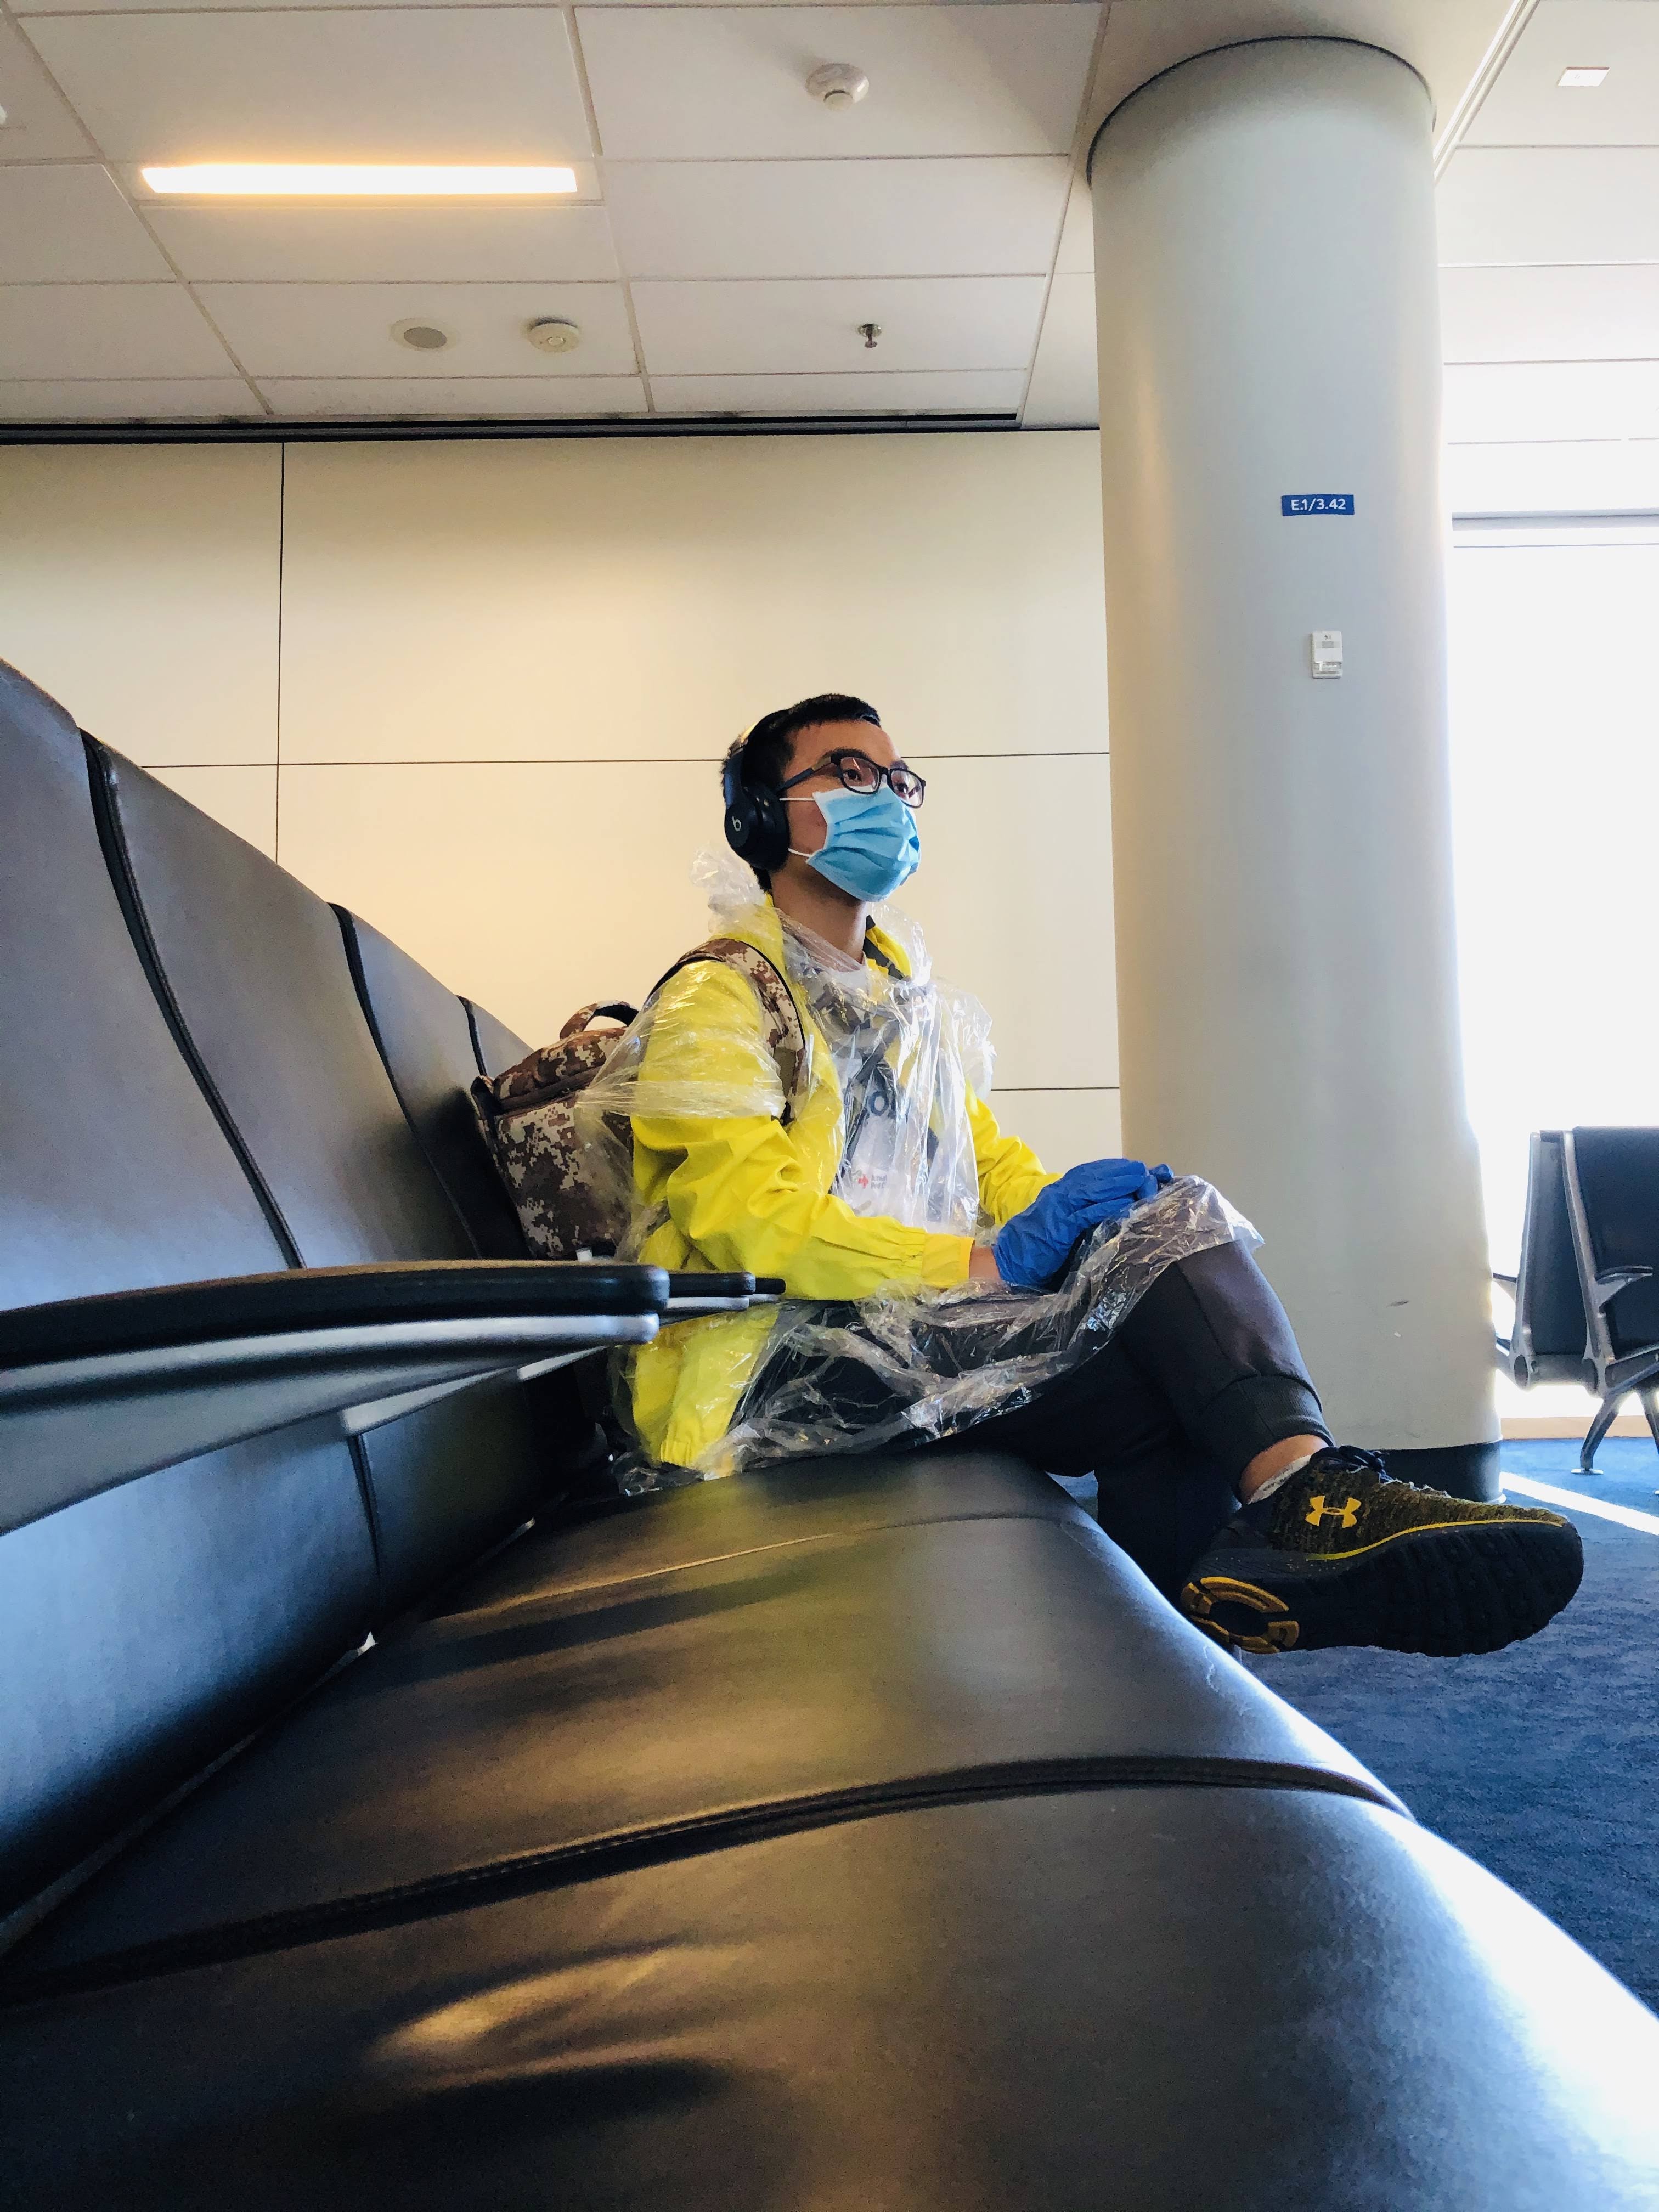 Truong masked in personal protective equipment while traveling home during COVID-19.